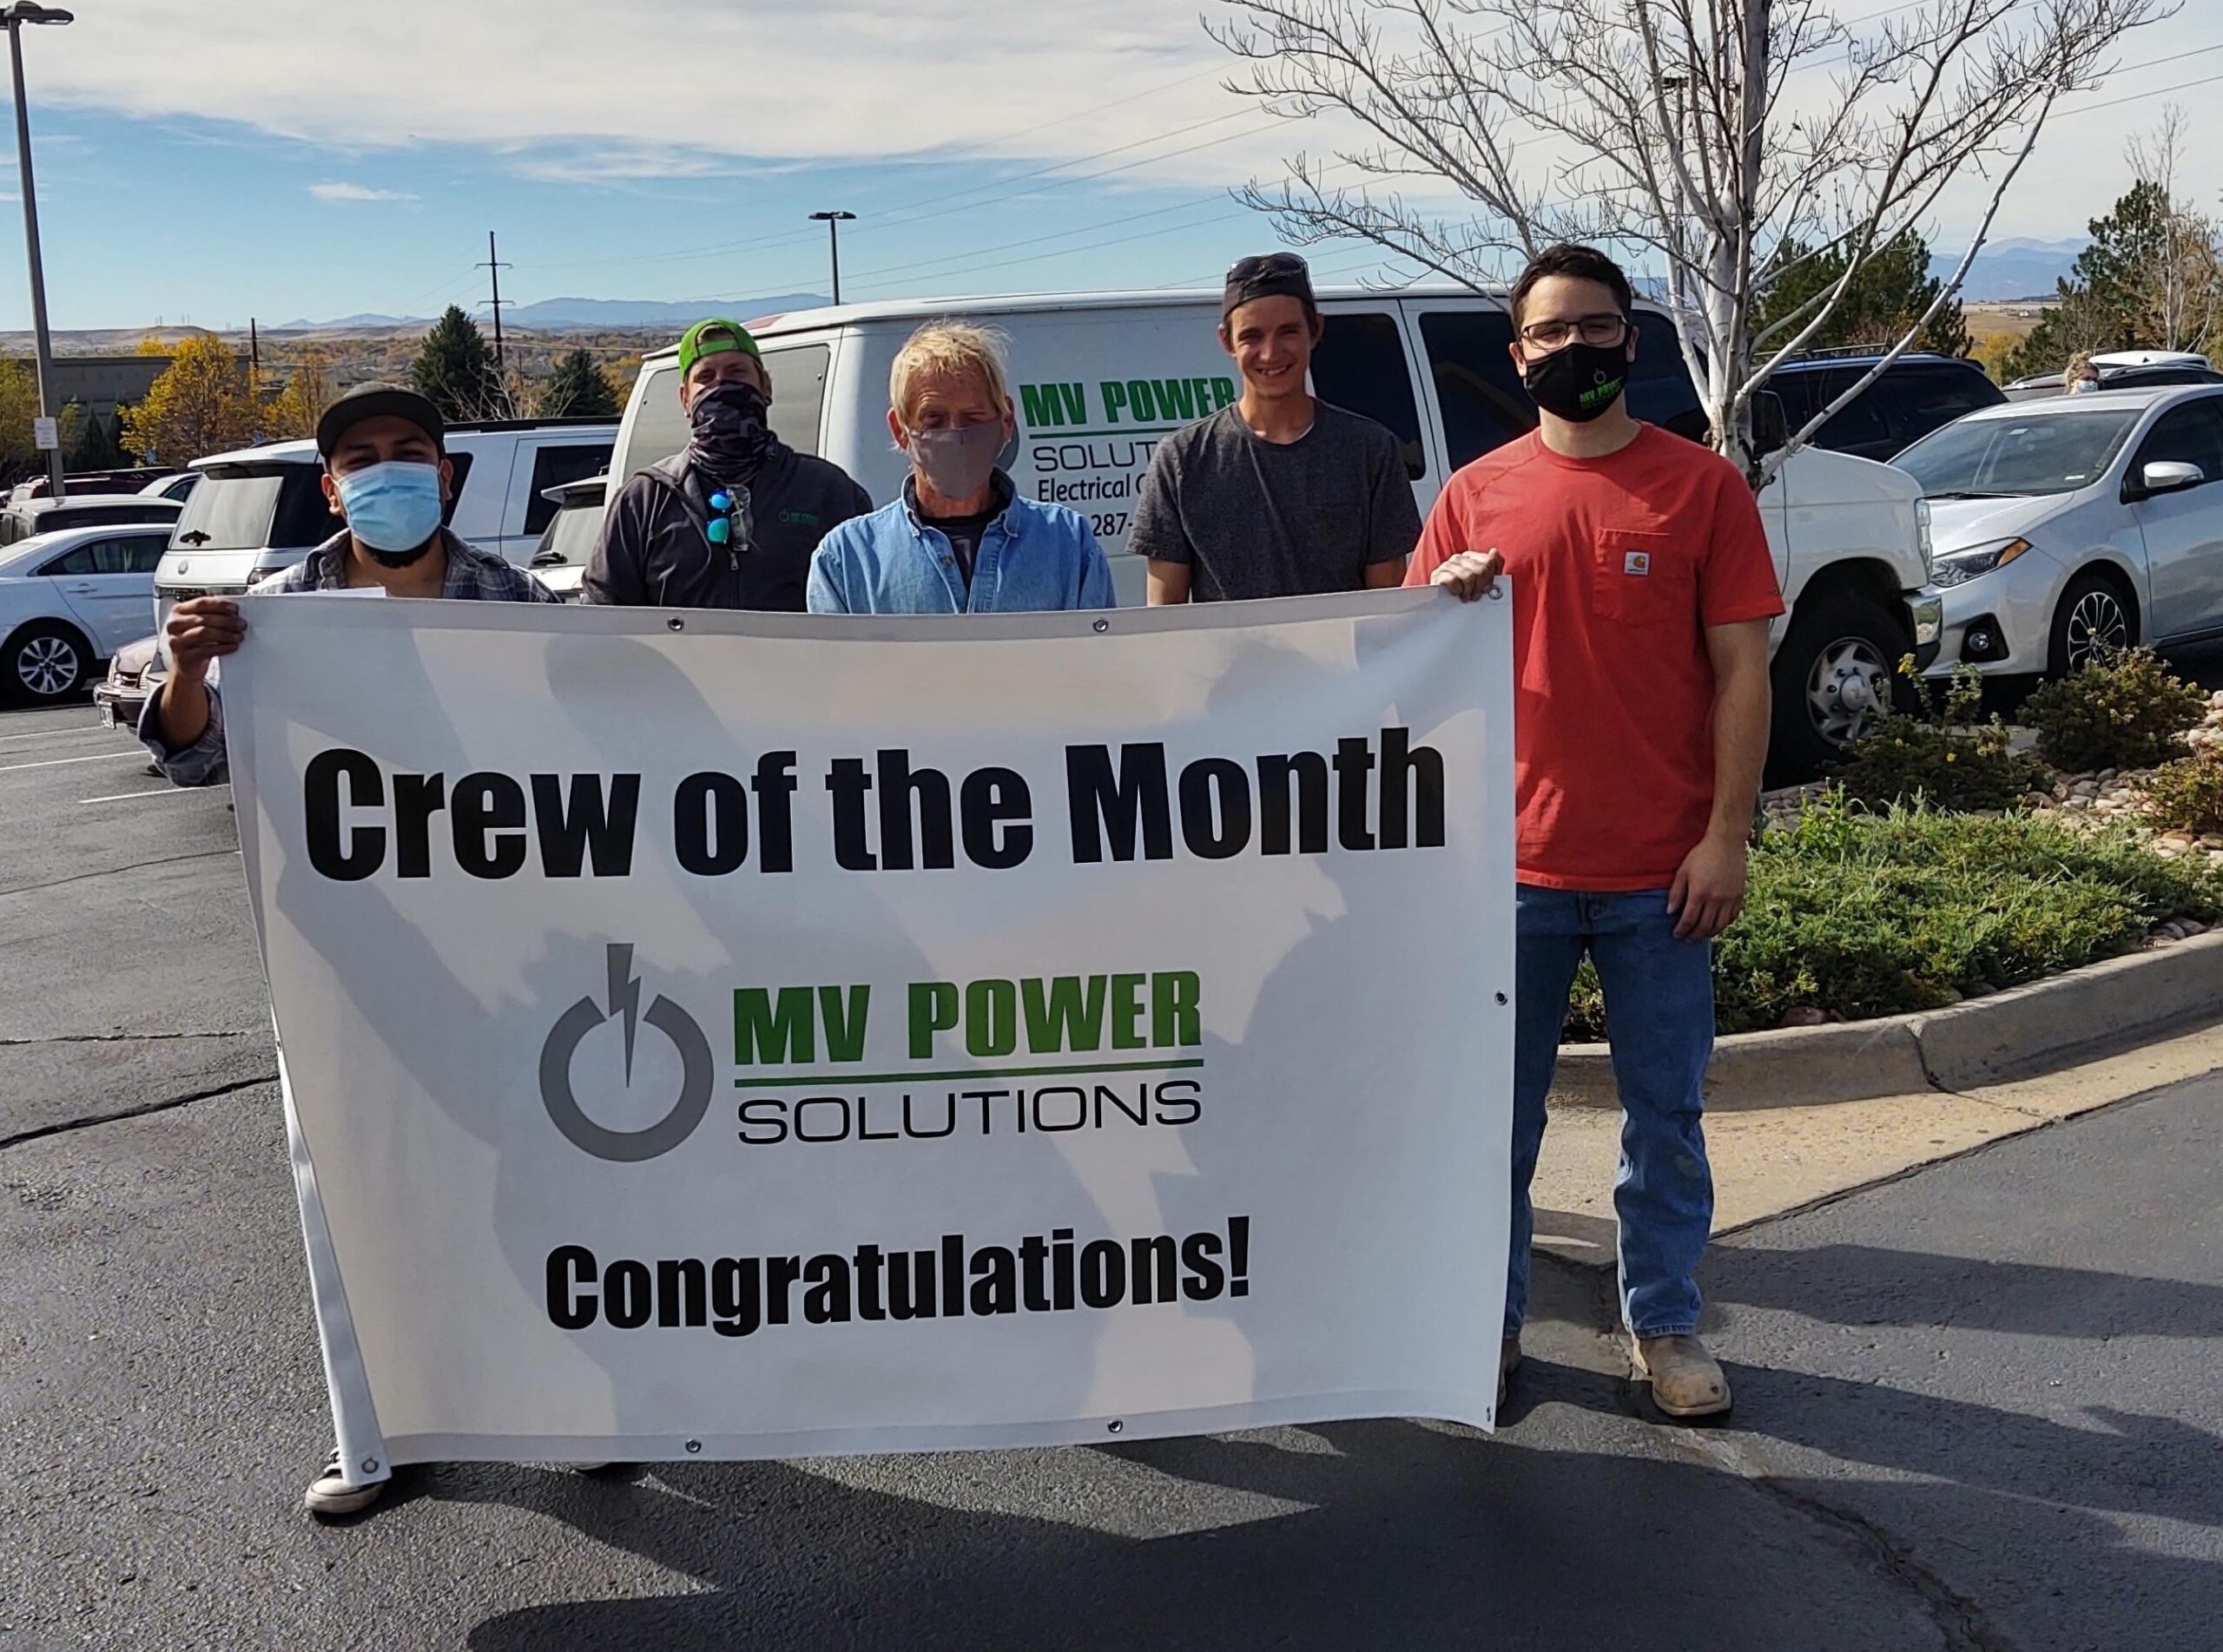 Crew of the Month – October